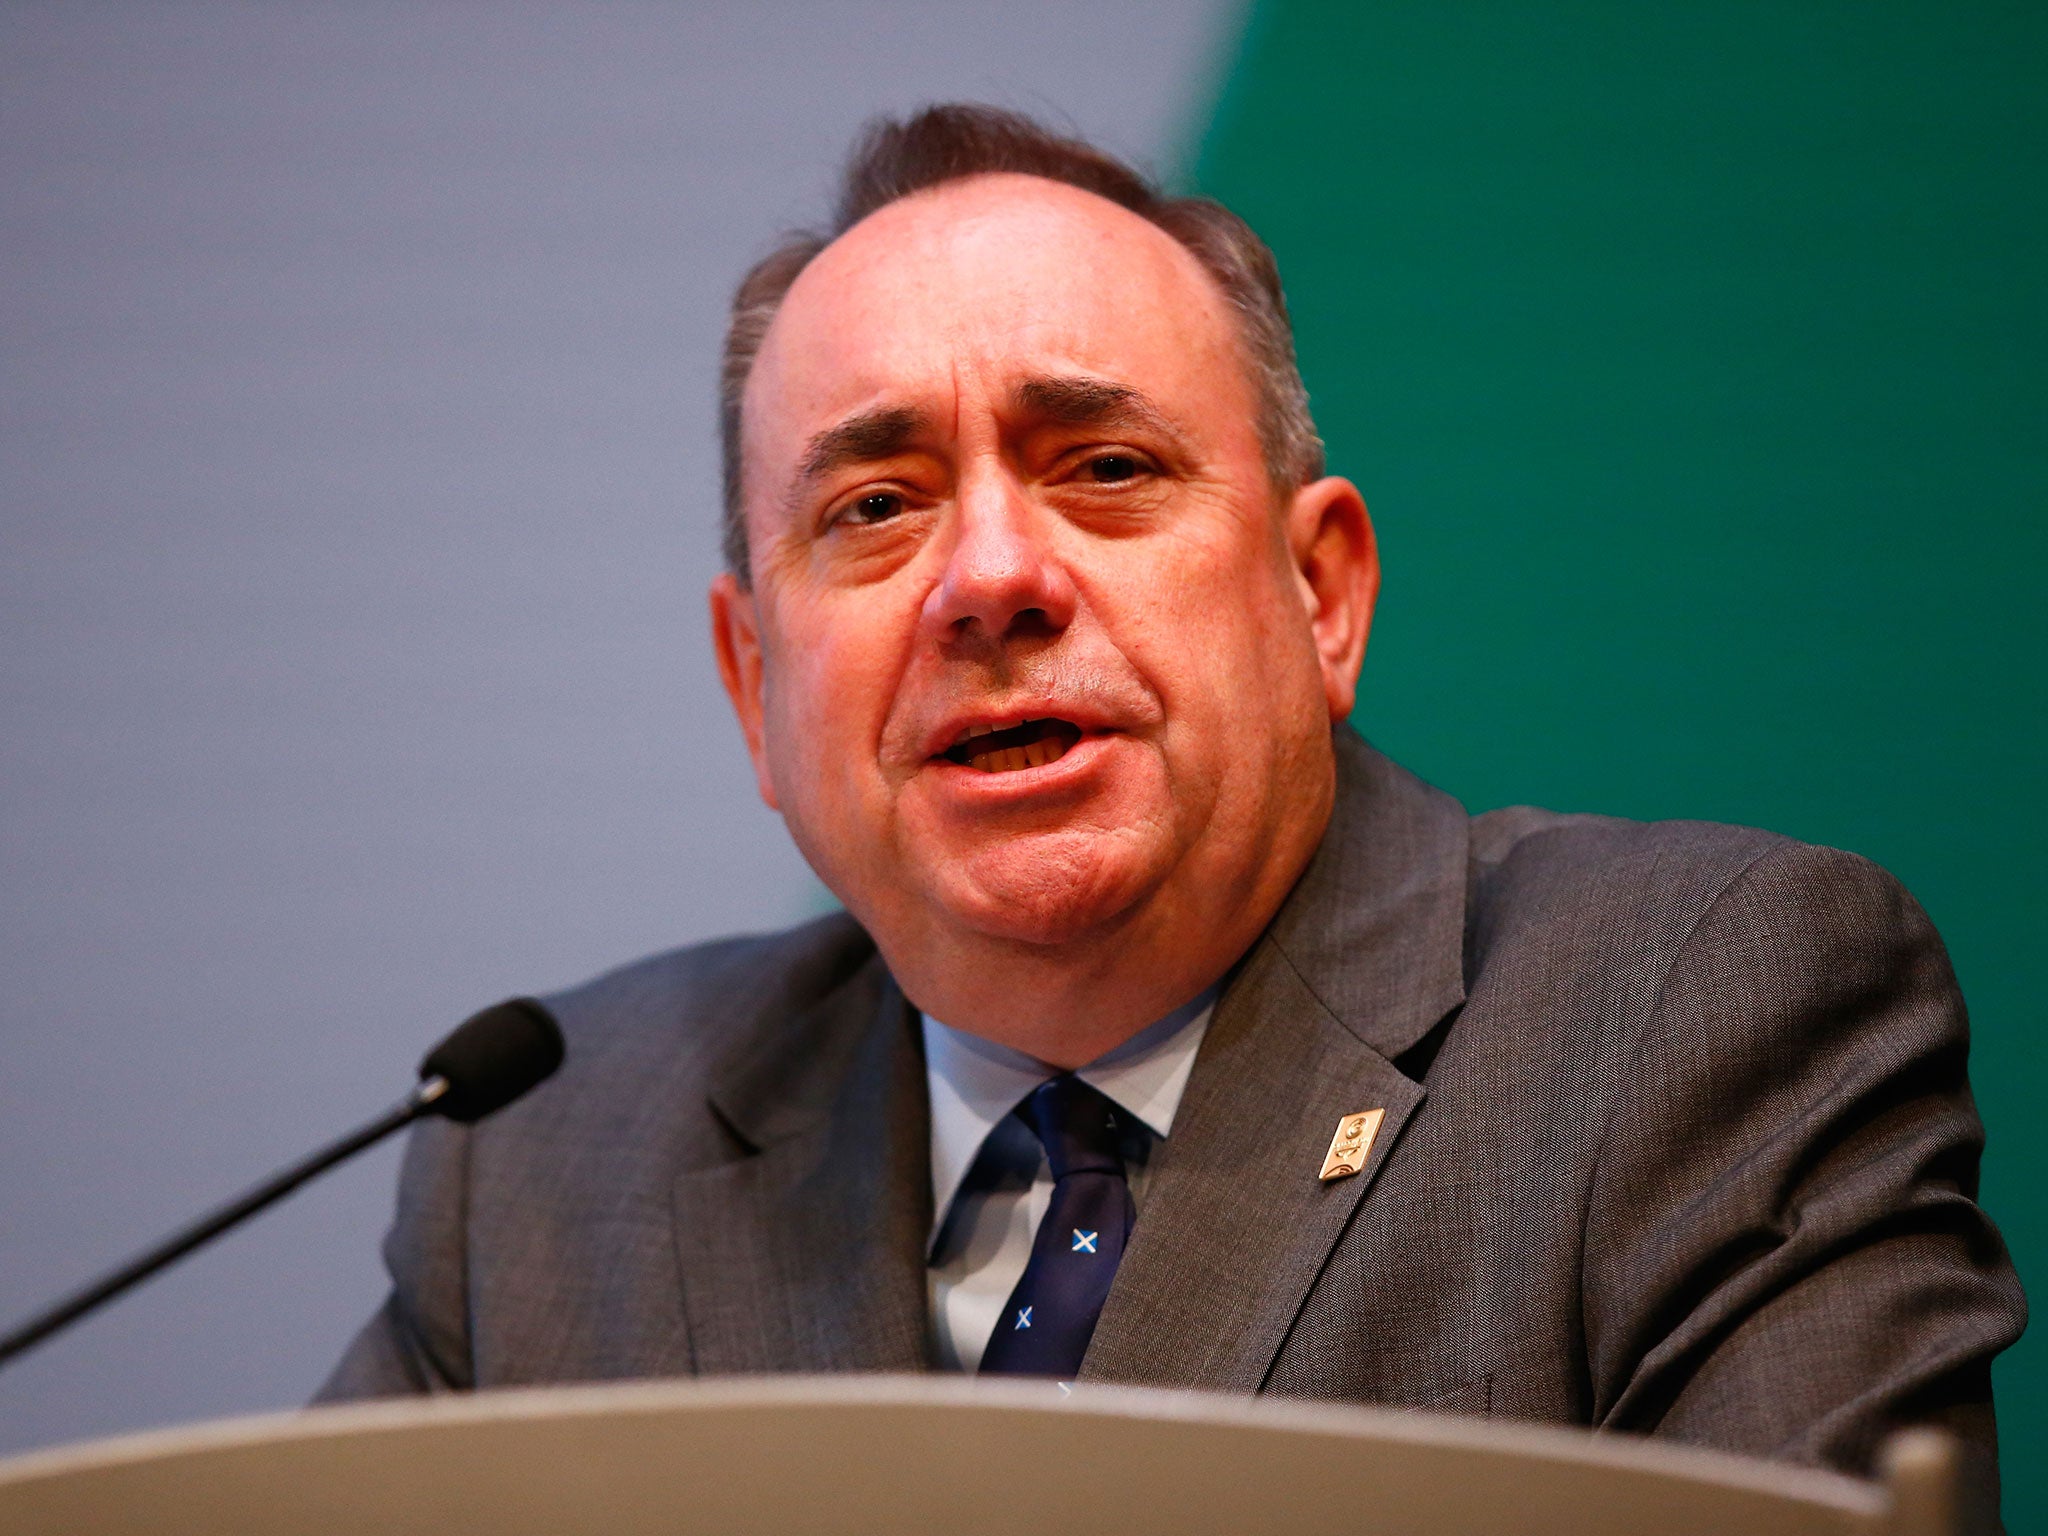 Polls show that Alex Salmond’s Yes campaign not benefited from the Commonwealth Games in Glasgow